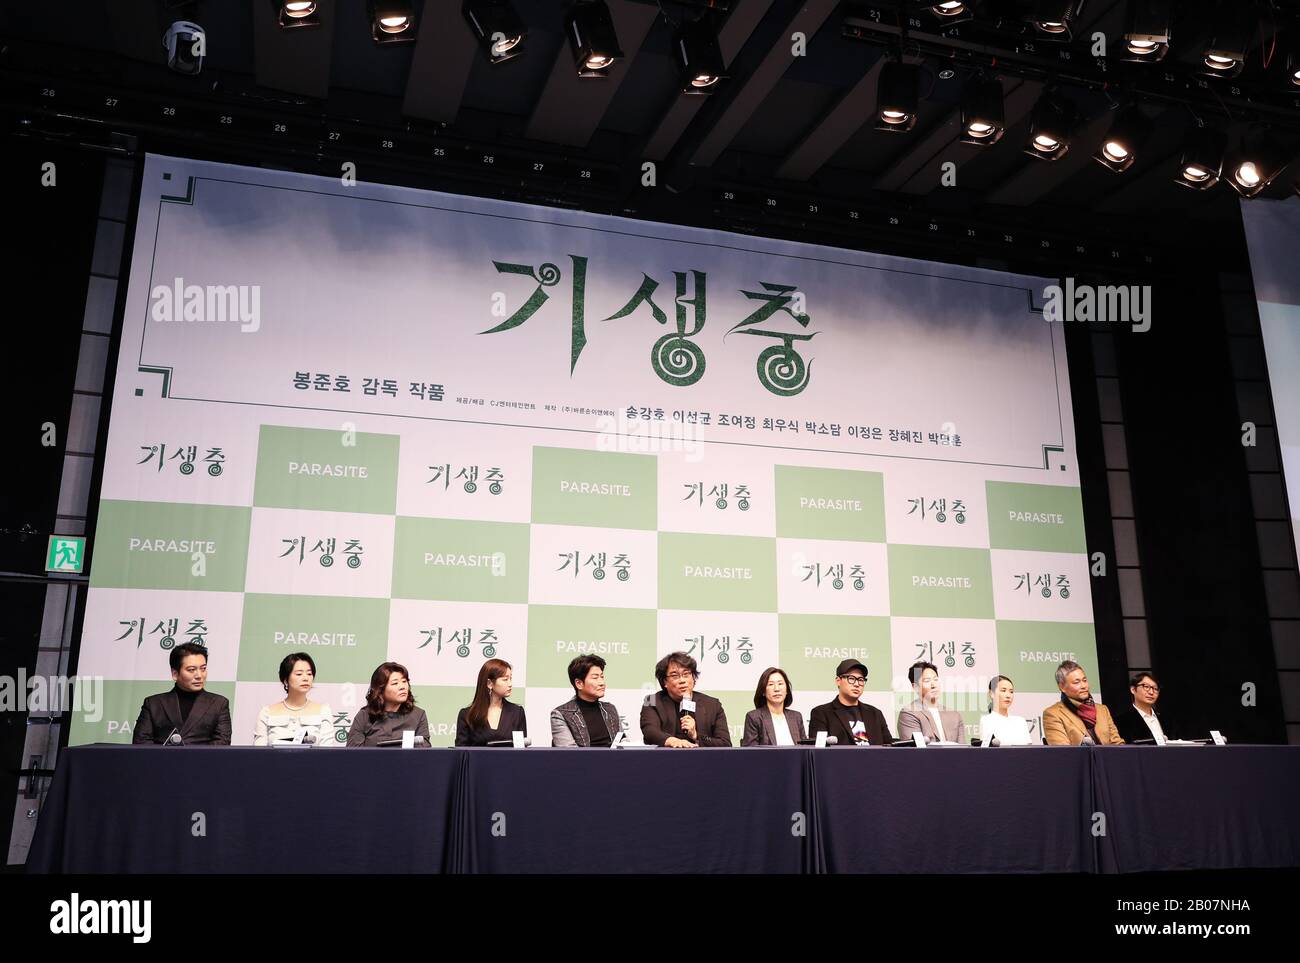 (200219) -- SEOUL, Feb. 19, 2020 (Xinhua) -- The cast and creative team of South Korean film 'Parasite' are seen at a press conference in Seoul, South Korea, Feb. 19, 2020. 'Parasite', a South Korean black comedy, became the first non-English language film to win the Oscar for best picture, and also nabbed awards for best original screenplay, best international feature film and best director for Bong Joon-ho at the 92nd Academy Awards on Feb. 9, 2020. (Xinhua/Wang Jingqiang) Stock Photo